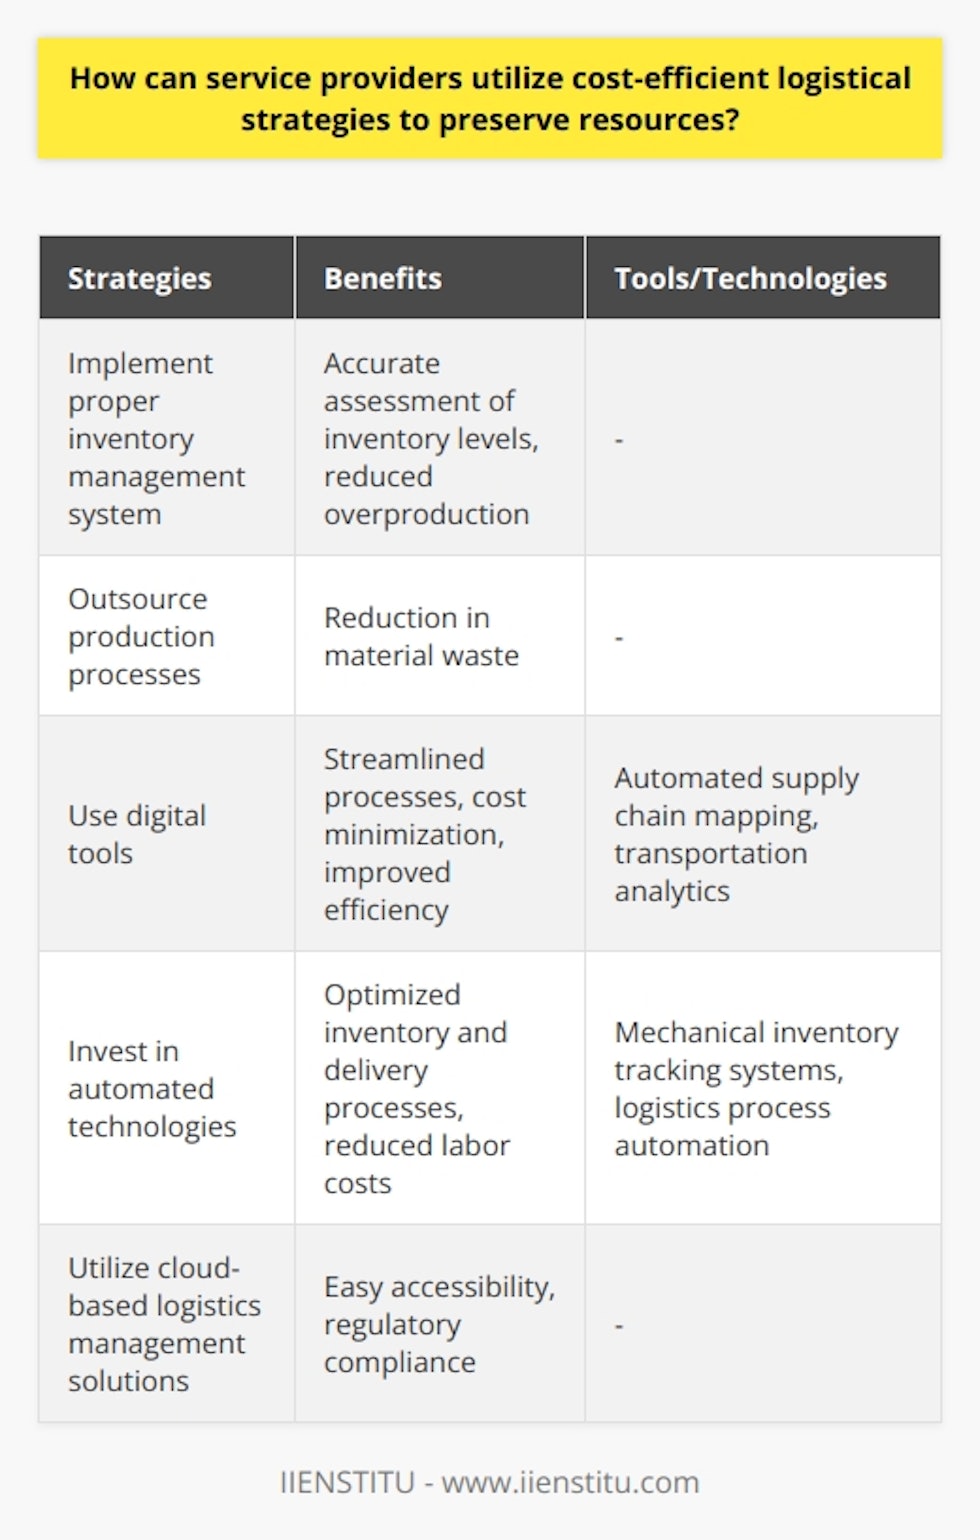 This can begin with implementing a proper inventory management system to accurately assess inventory levels and reduce overproduction. Outsourcing certain production processes to specialized third parties can also help reduce material waste. The use of digital tools, such as automated supply chain mapping and transportation analytics, can help service providers streamline their logistical processes, minimize costs, and optimize efficiency. Investing in automated technologies, like mechanical inventory tracking systems and logistics process automation, can further optimize inventory and delivery processes while reducing labor costs. Cloud-based logistics management solutions can also provide easy accessibility and regulatory compliance. By implementing these cost-efficient strategies, service providers can effectively preserve resources while maximizing productivity and profitability.